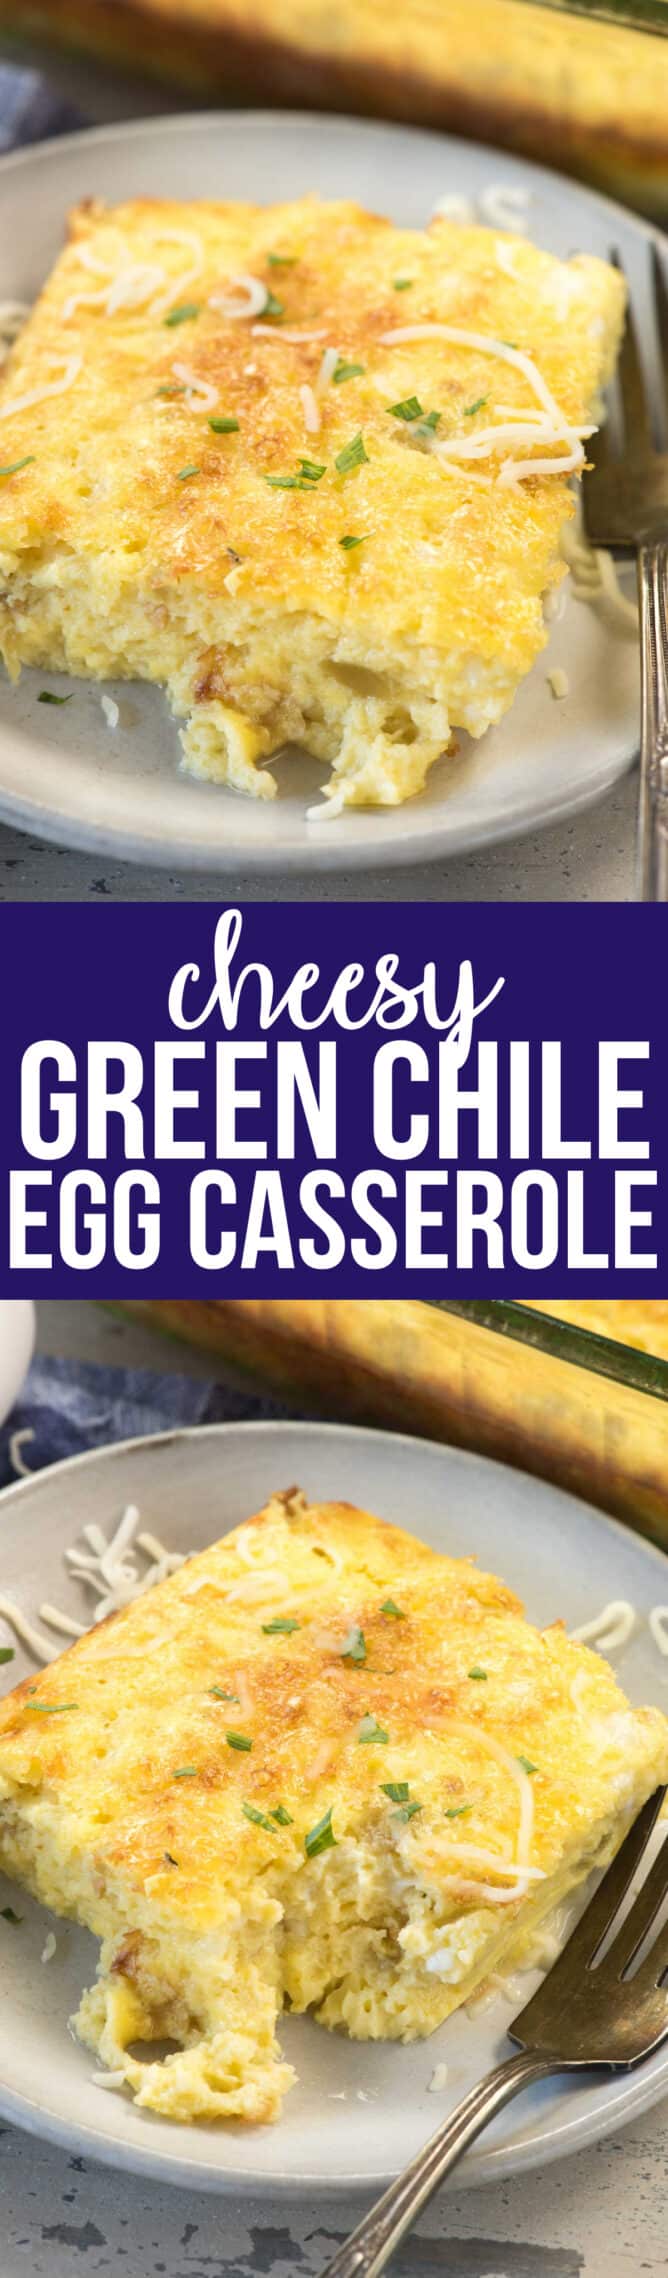 Collage of Cheesy Green Chile Egg Casserole